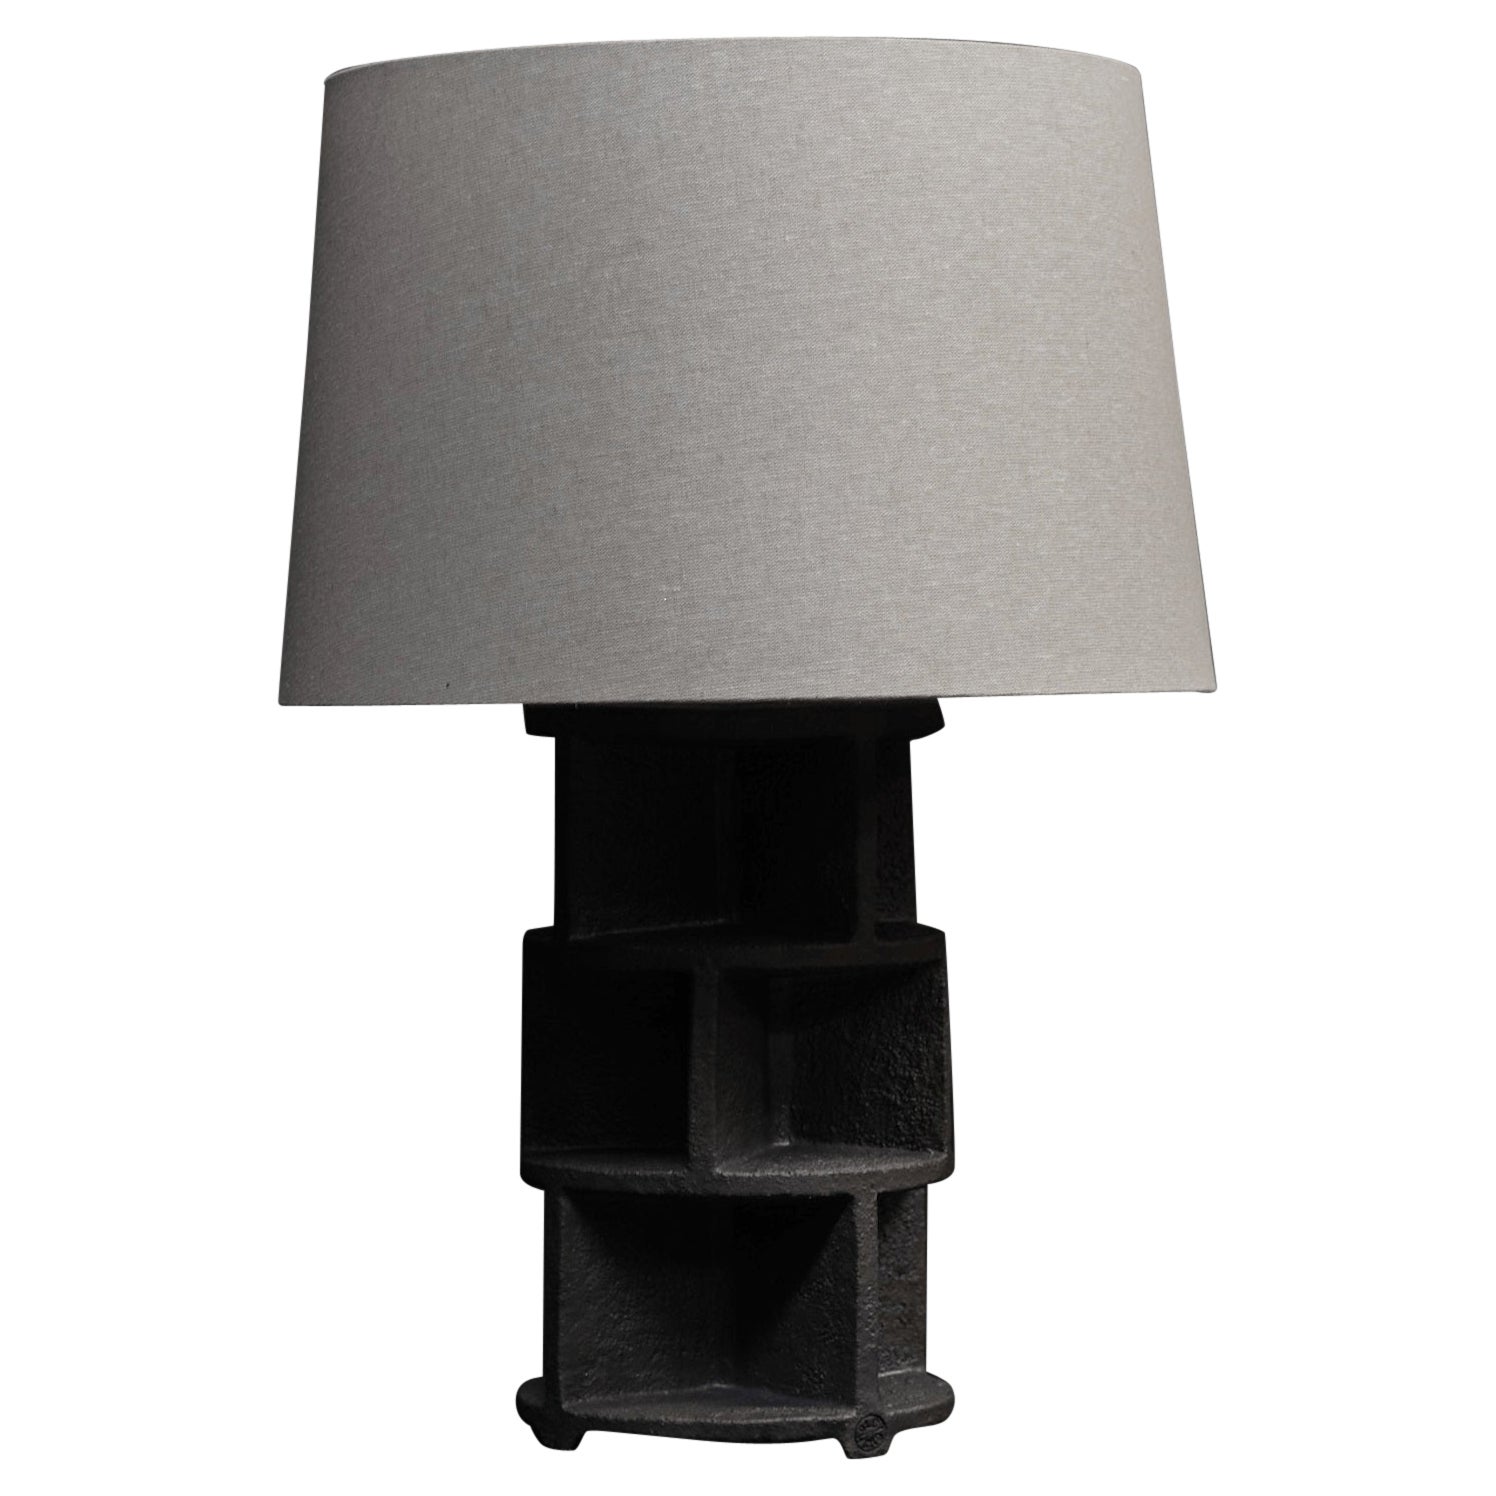 Jig Ceramic Table Lamp For Sale